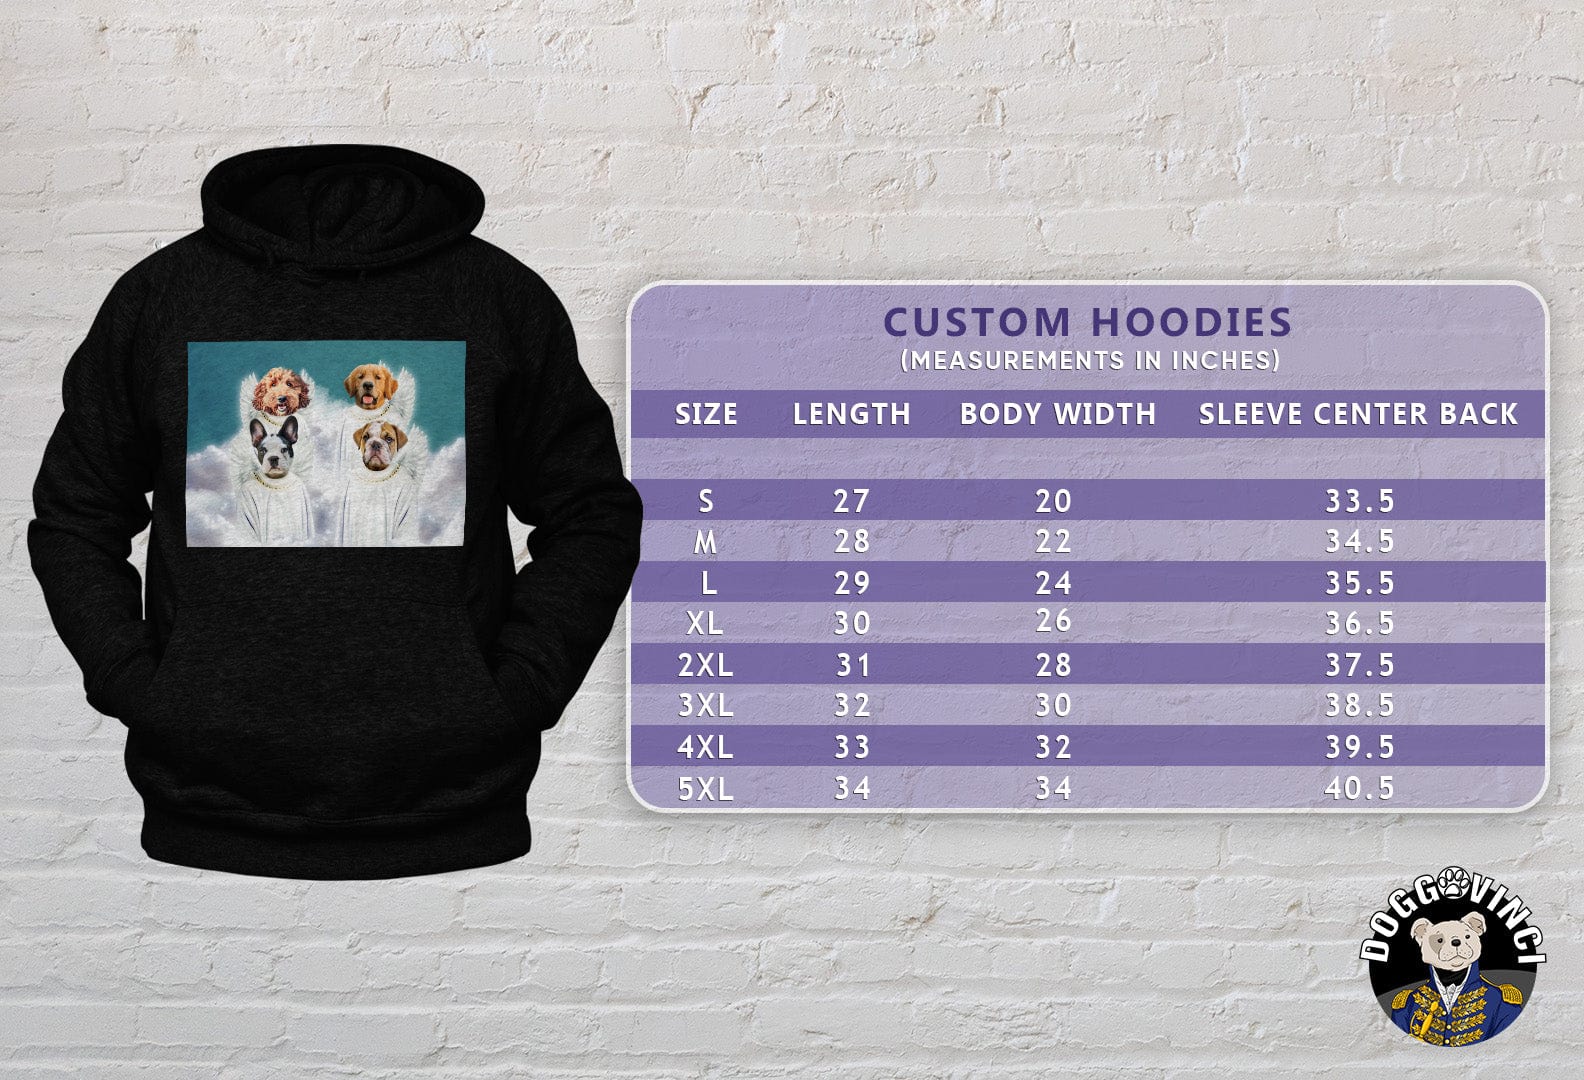 &#39;4 Angels&#39; Personalized 4 Pet Hoody